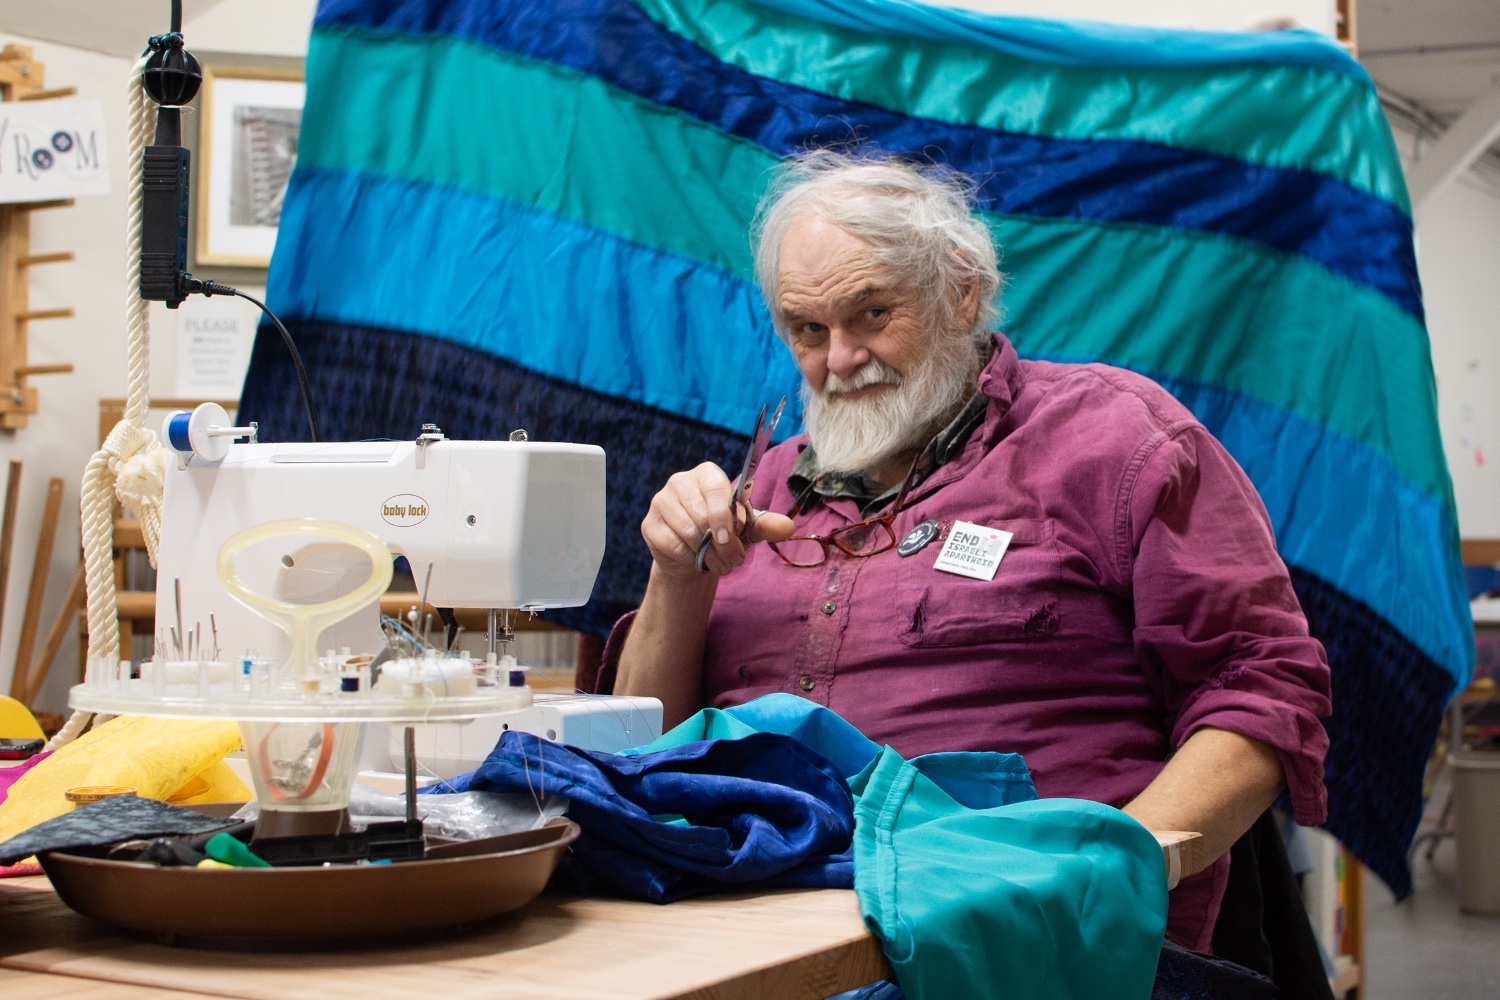 Harold Niven sits to the left of the frame and looks wryly at the camera, a pair of sewing scissors in hand. He has light skin, unruly white hair and a white beard. A red pair of glasses sits around his chest against a burgundy button-down shirt. He sits at a sewing table before a white sewing machine and a swath of turquoise and blue fabric. Behind him is a large, striped, blue, turquoise and dark blue blanket hanging on a wide high structure.